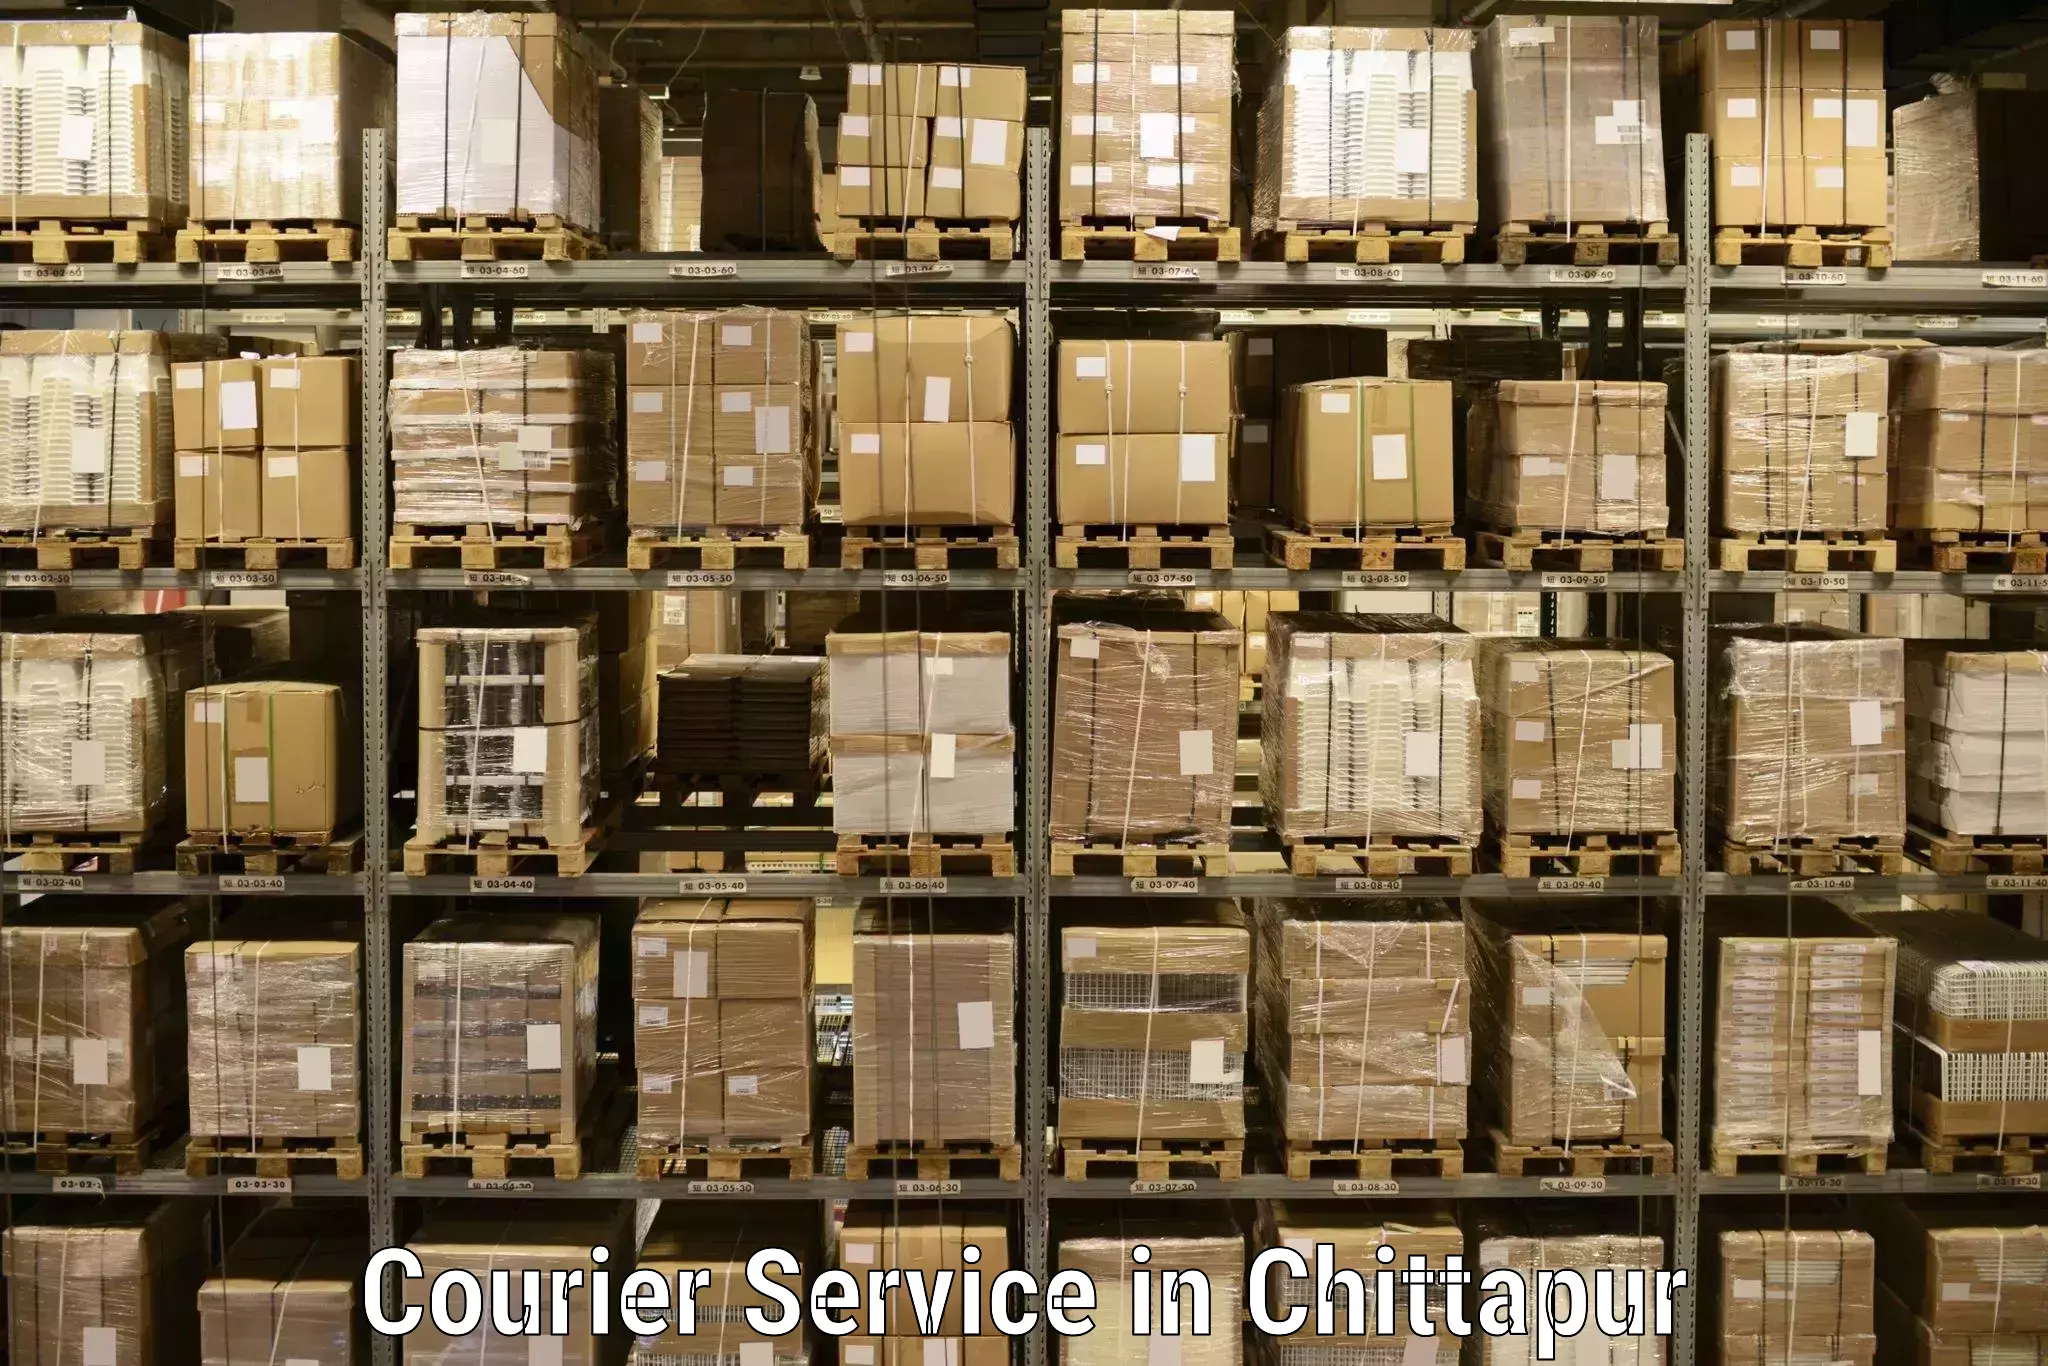 Specialized shipment handling in Chittapur